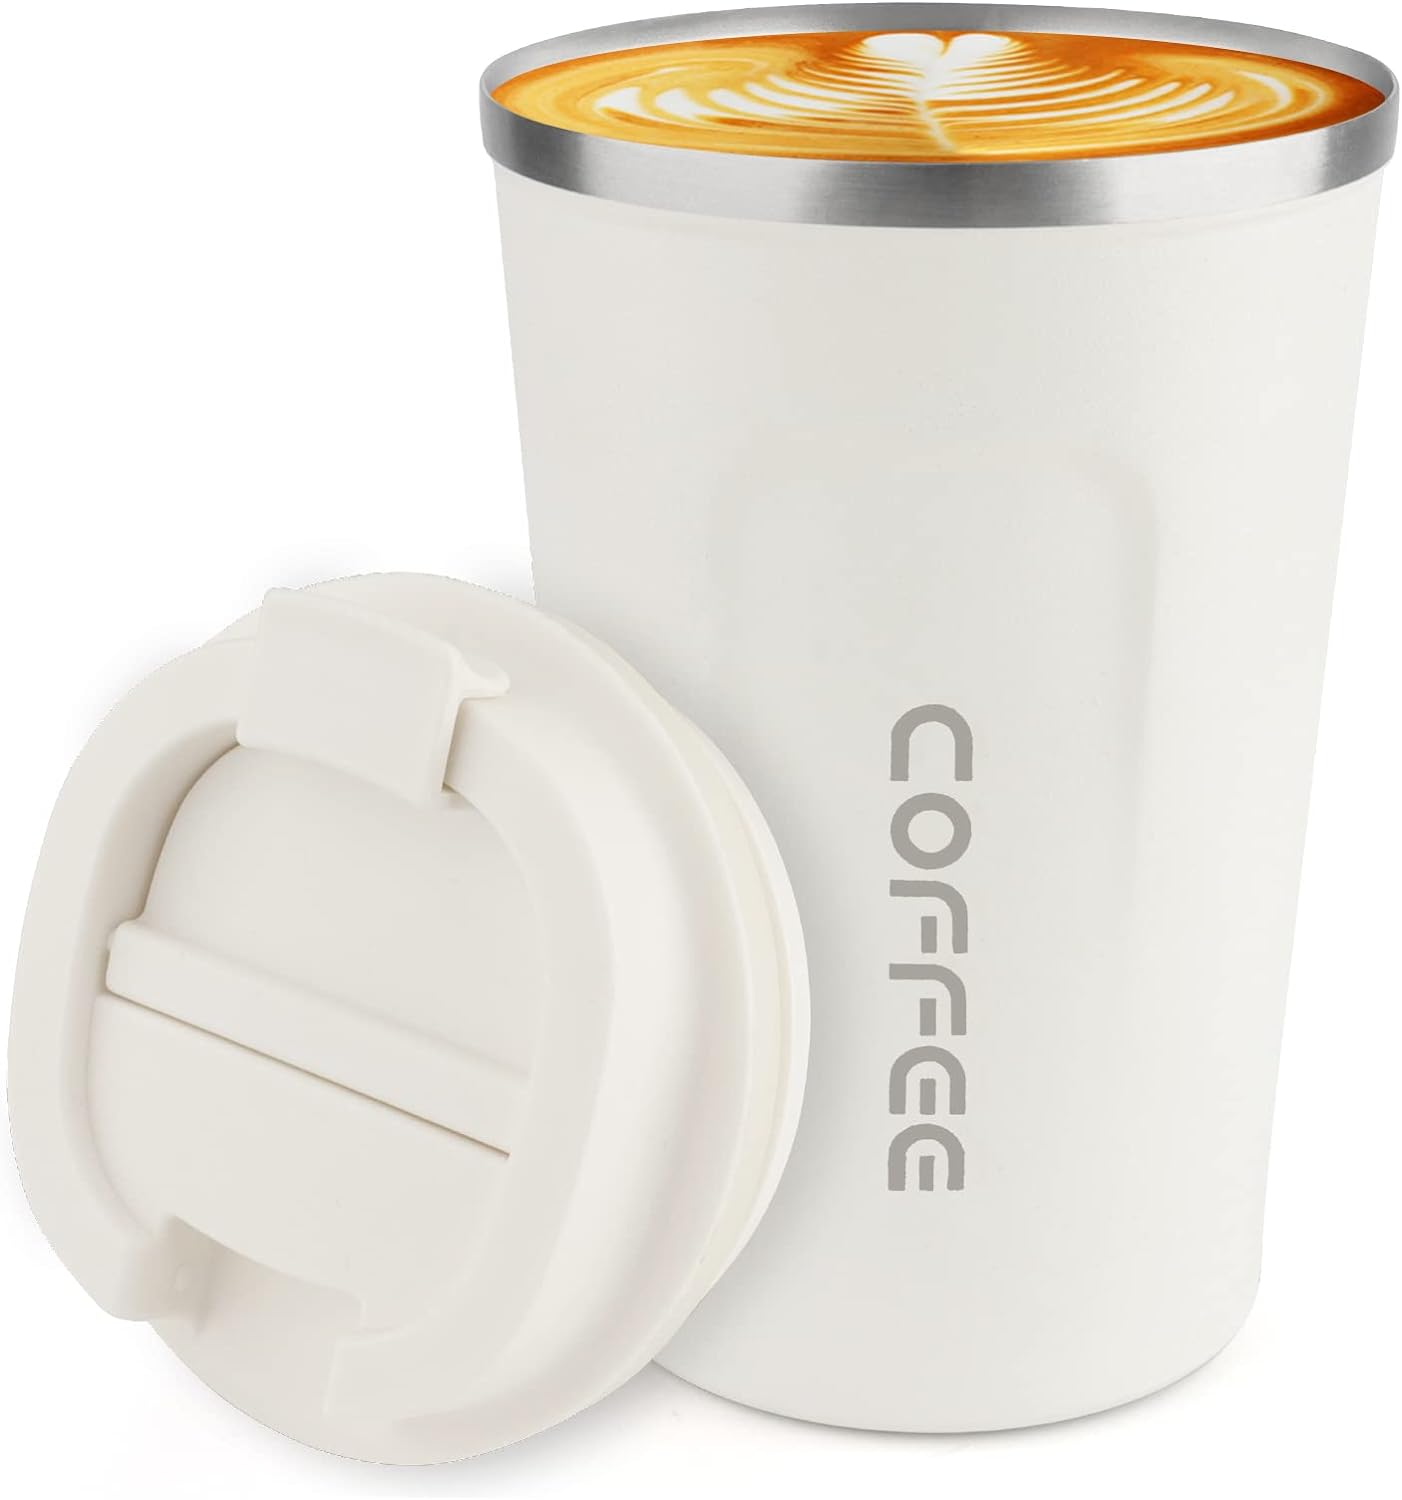 Keeps coffee hot. Fits in car holder. Great size. Easy to clean. Comfortable to drink out of. Spill proof. Everything you could ask. No disappointment.